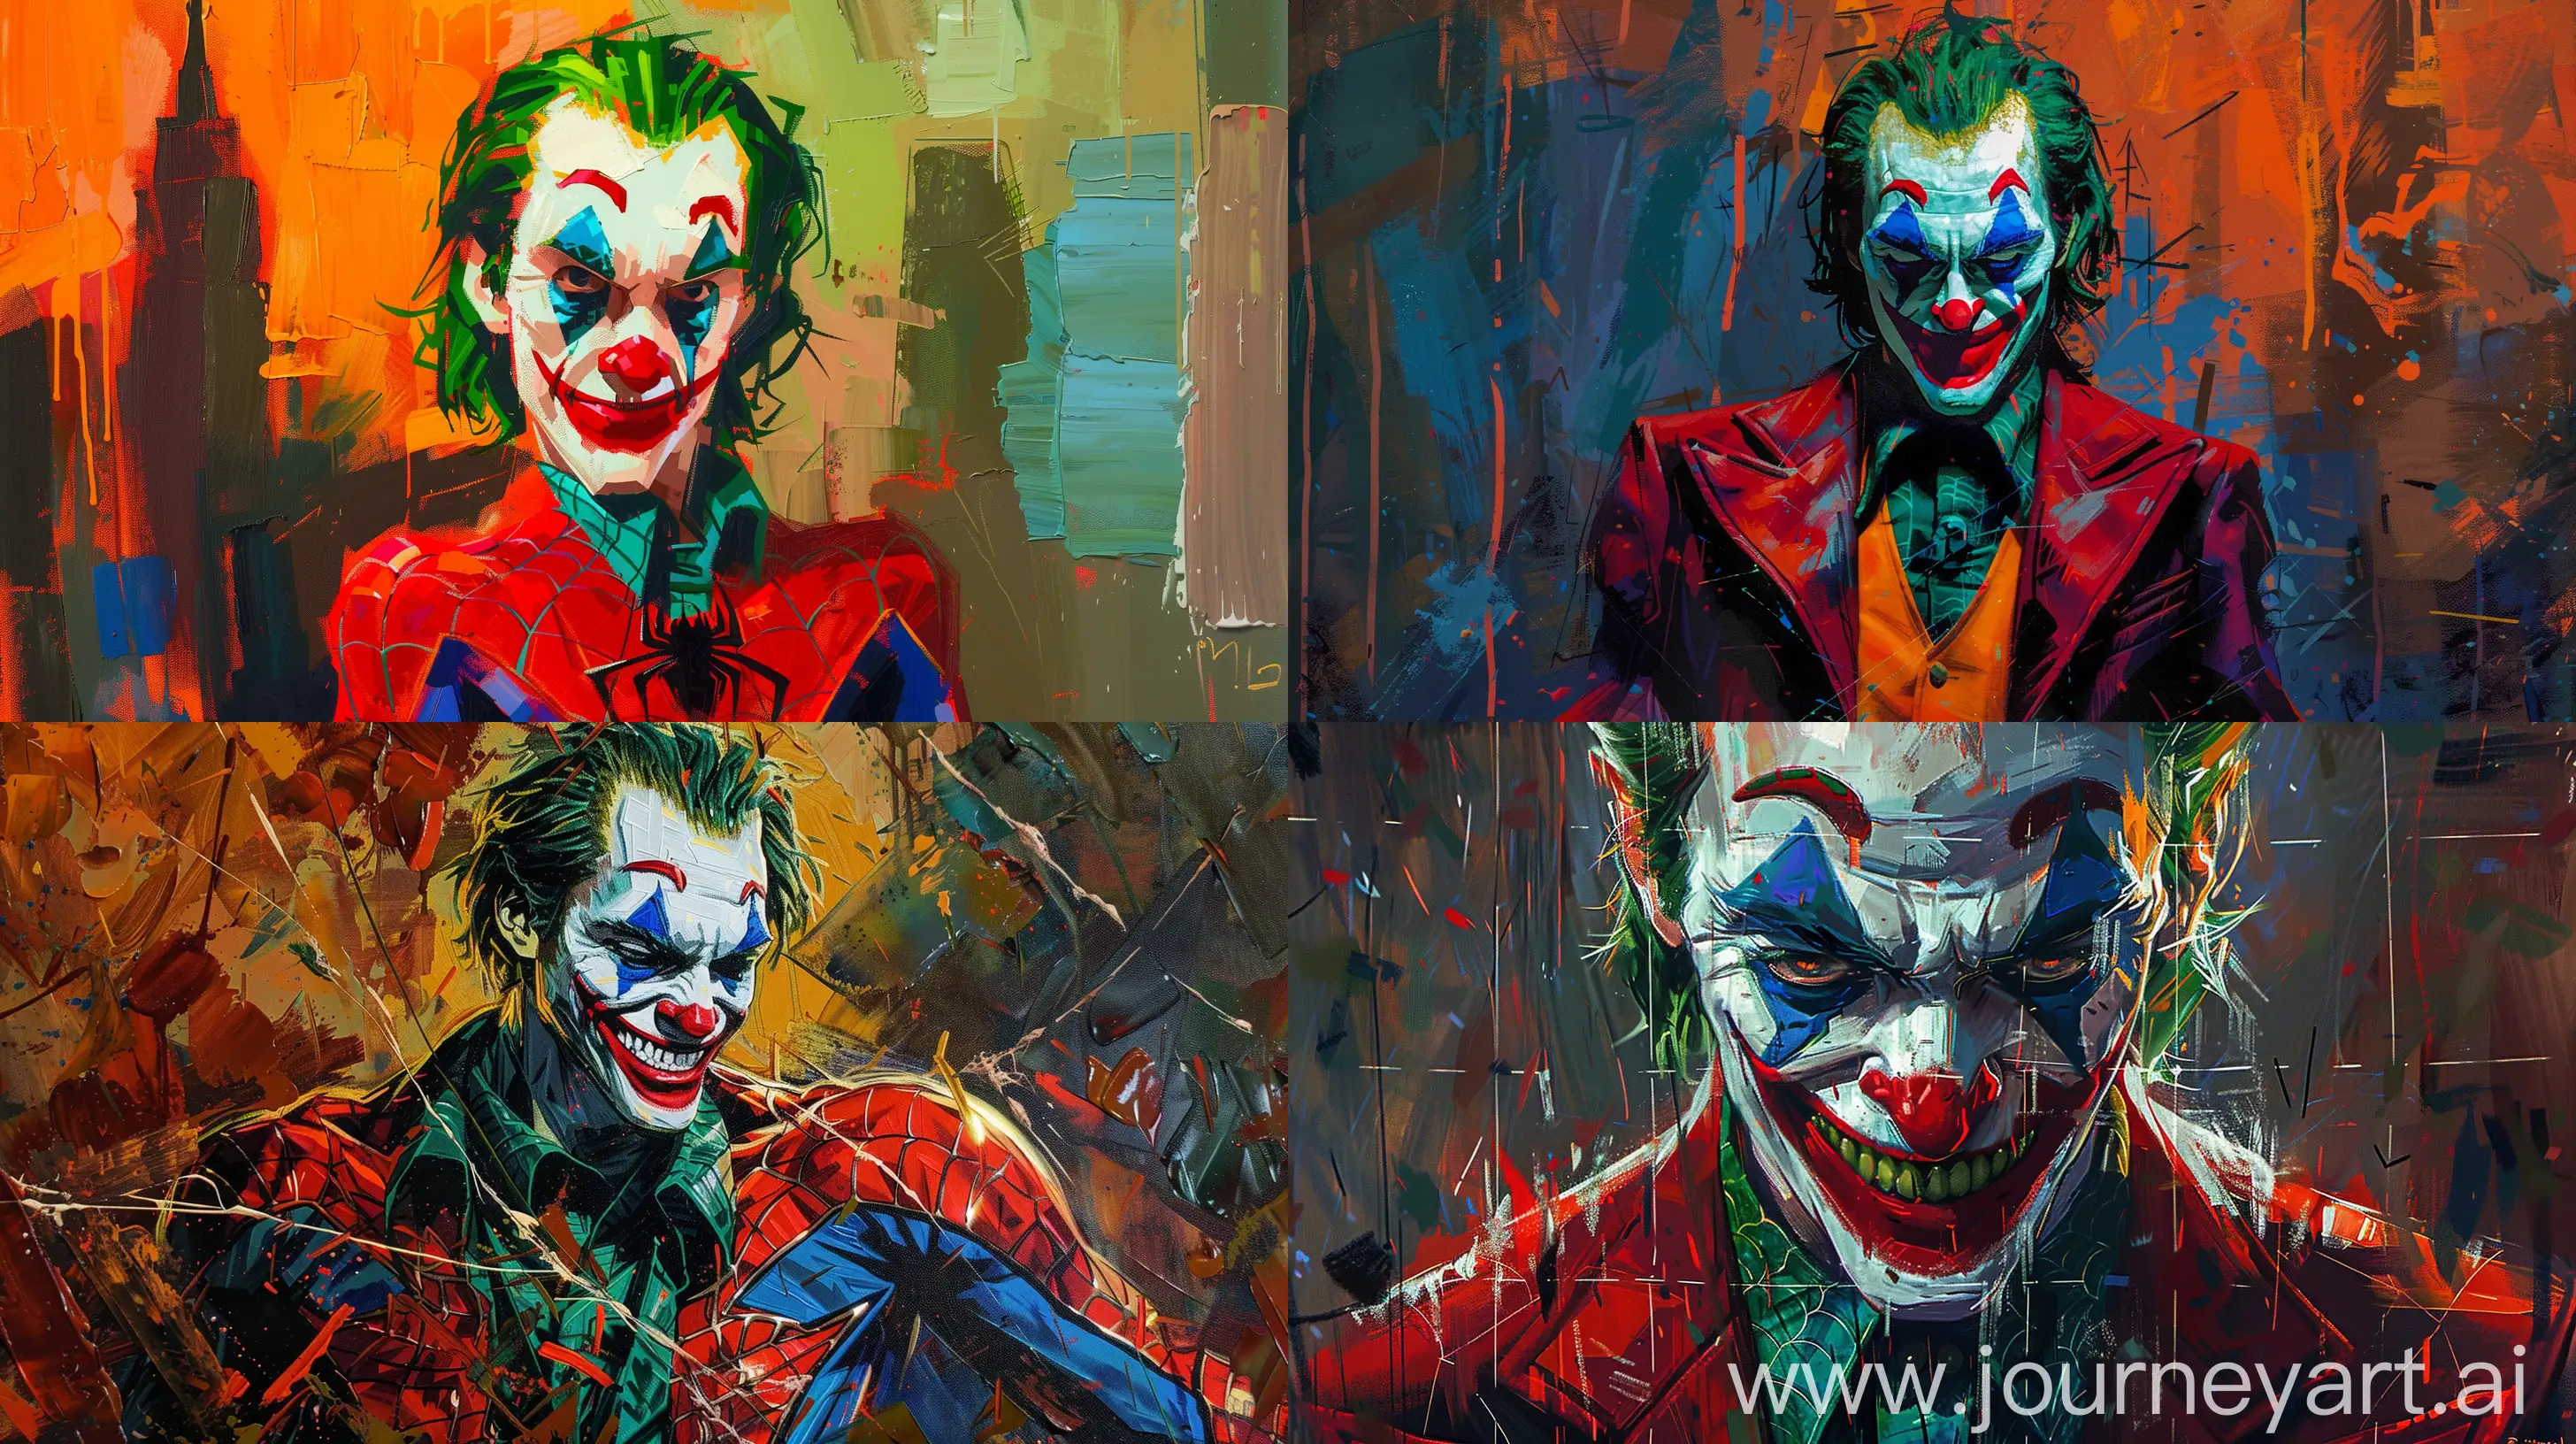 Joker-and-Spiderman-Meet-A-Dynamic-Oil-Painting-in-SpiderVerse-Style